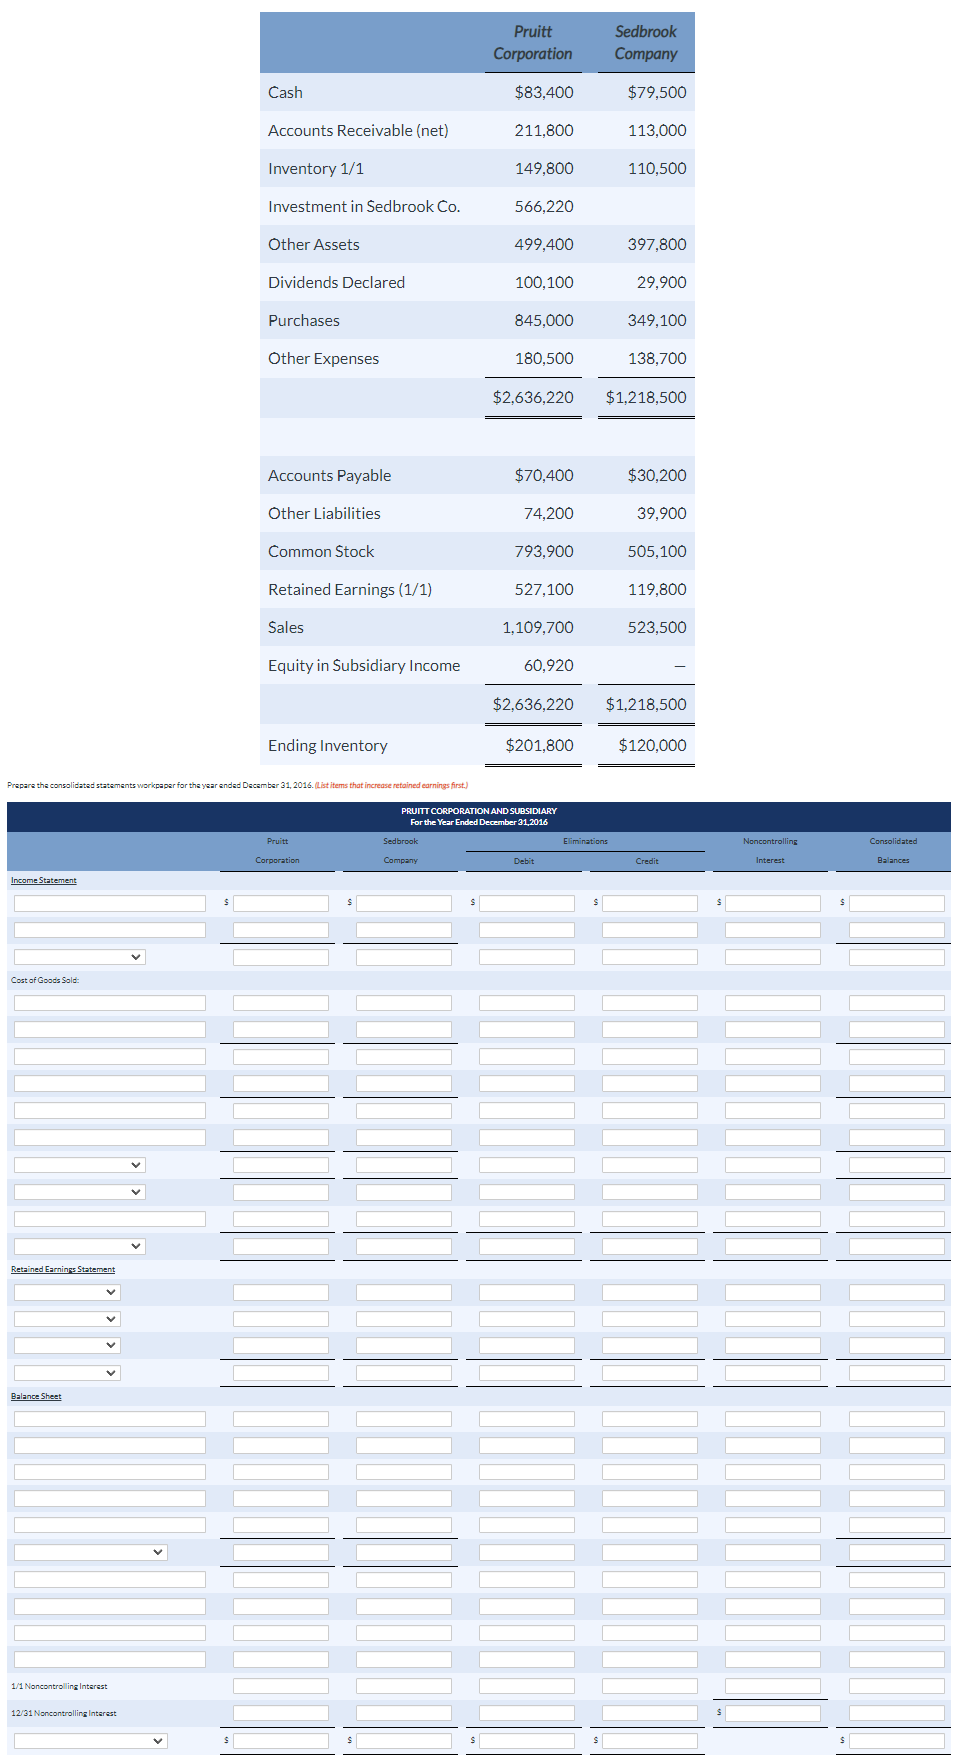 Income Statement
Cost of Goods Sold:
Retained Earnings Statement
Balance Sheet
V
1/1 Noncontrolling Interest
Cash
12/31 Noncontrolling Interest
Accounts Receivable (net)
Inventory 1/1
Investment in Sedbrook Co.
Other Assets
Dividends Declared
Prepare the consolidated statements workpaper for the year ended December 31, 2016. (List items that increase retained earnings first.)
Purchases
Other Expenses
Accounts Payable
Other Liabilities
Common Stock
Retained Earnings (1/1)
Sales
Equity in Subsidiary Income
Ending Inventory
Pruitt
Corporation
Pruitt
Corporation
$83,400
Sedbrook
Company
211,800
149,800
566,220
499.400
100,100
845,000
180,500
$70,400
74,200
793,900
527,100
1,109,700
60,920
$2,636,220
$2,636,220 $1,218,500
$201,800
PRUITT CORPORATION AND SUBSIDIARY
For the Year Ended December 31,2016
Debit
Sedbrook
Company
$79,500
113,000
110,500
Eliminations
397,800
29.900
349,100
138,700
$30,200
39,900
505,100
119,800
523,500
$1,218,500
$120,000
Credit
Noncontrolling
Interest
Consolidated
Balances